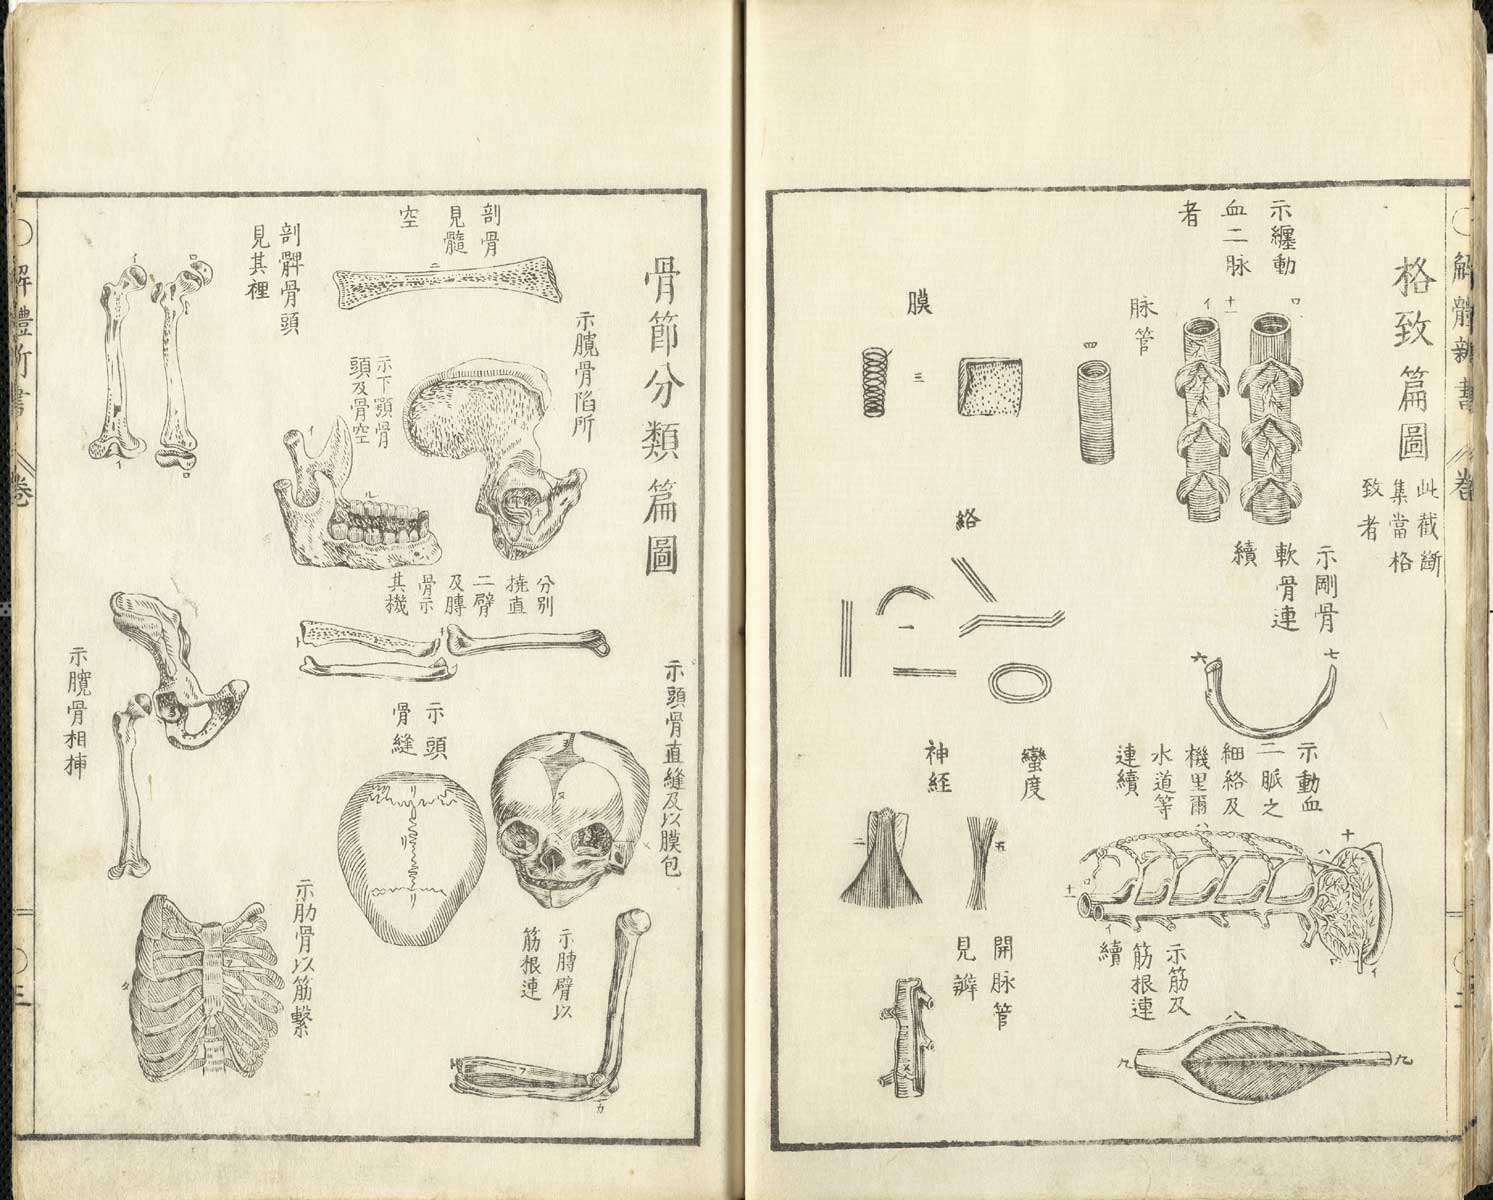 Pages 2 and 3 of Johann Adam Kulmus' Kaitai shinsho. On page 2 there are illustrations of the arteries of the body. On page three are illustrations of the bones of the head, chest and pelvis.